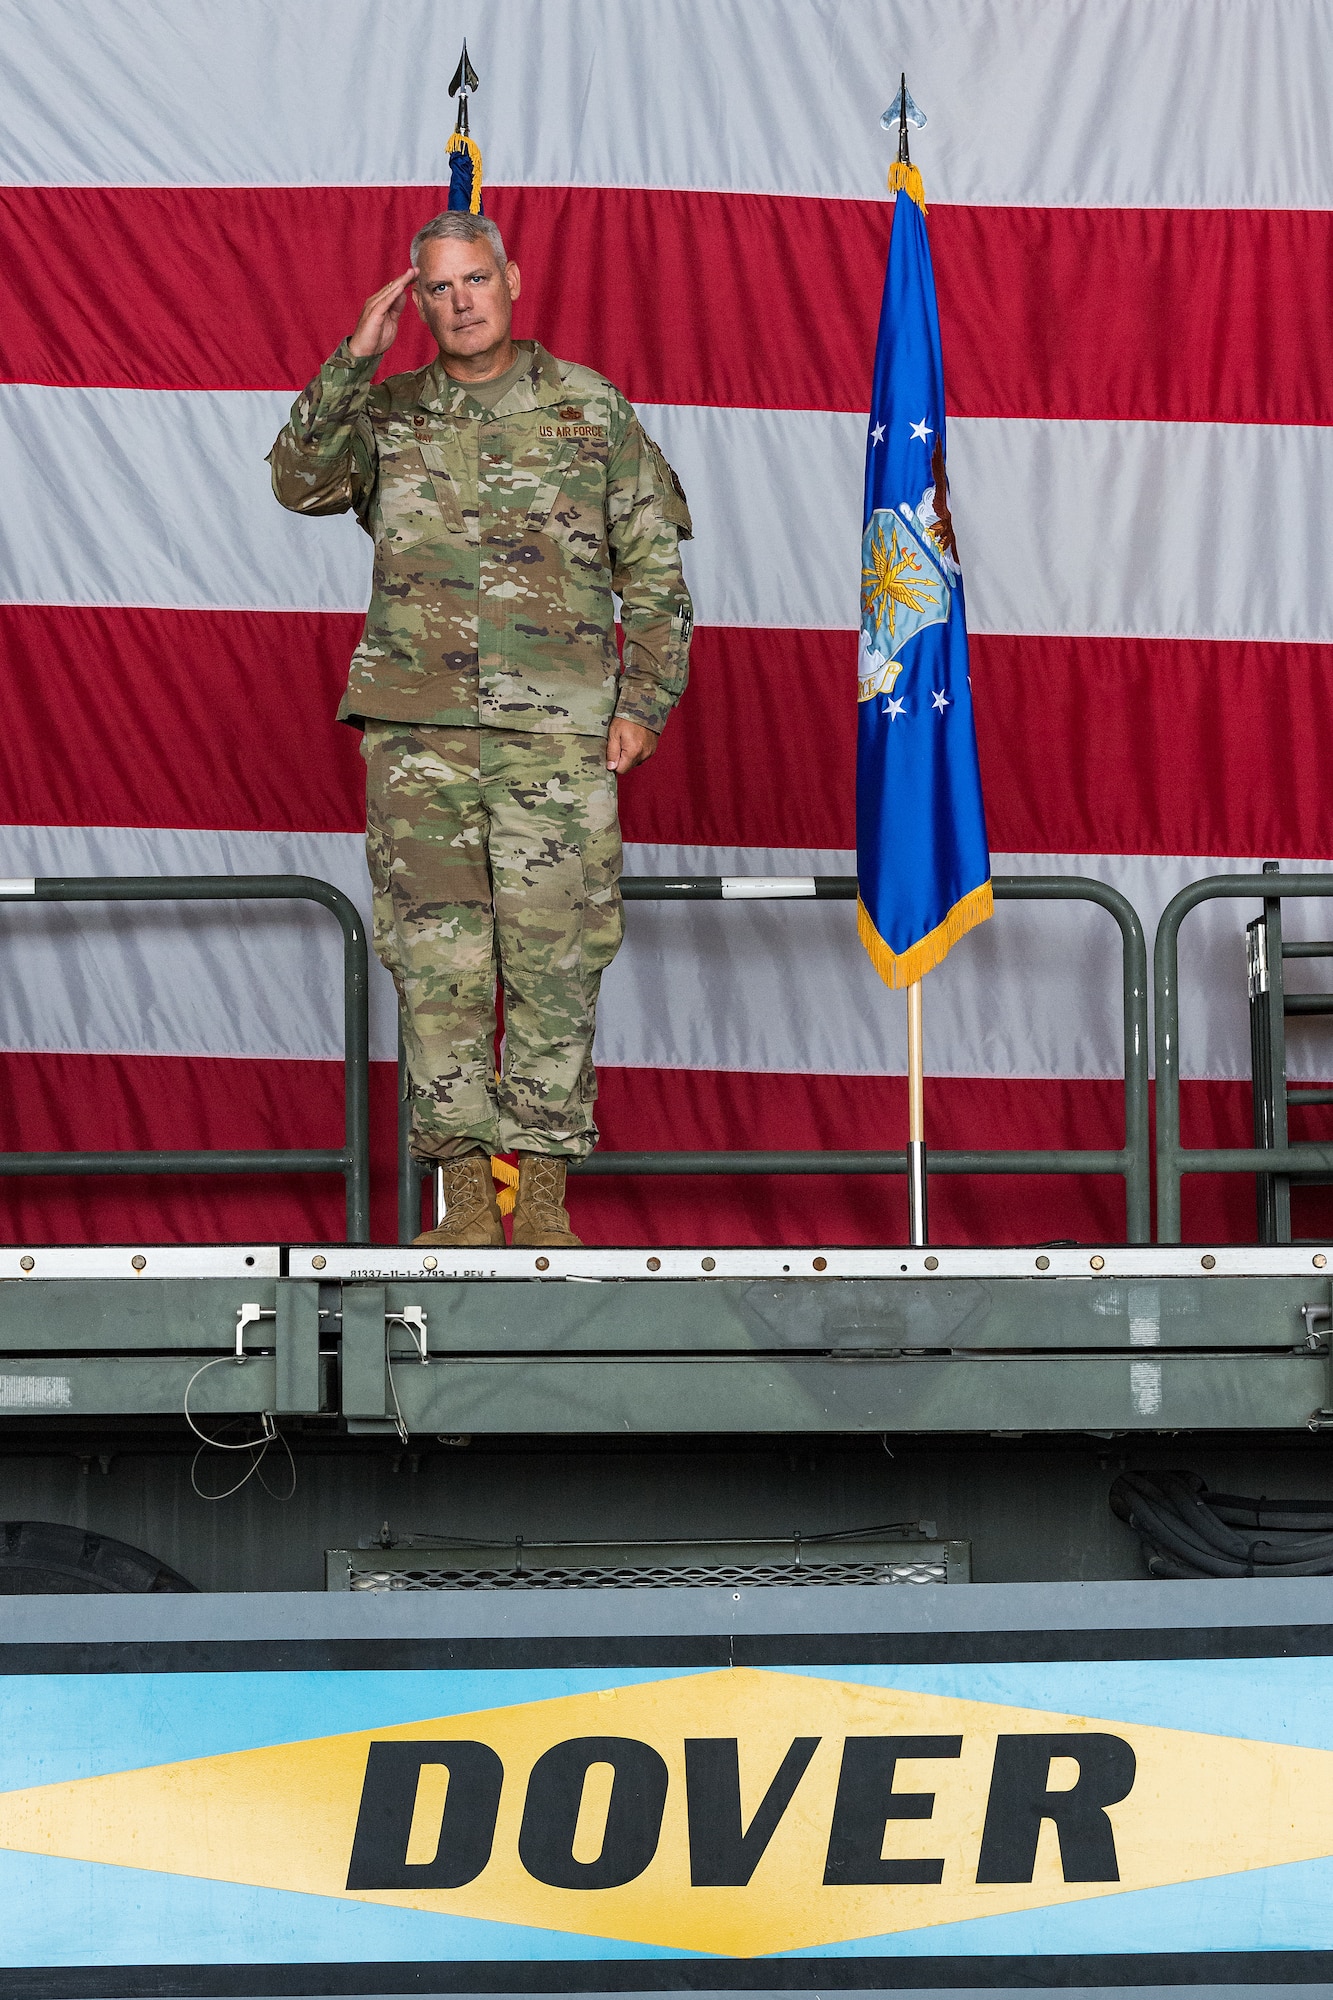 Col. Christopher May, 436th Maintenance Group commander, receives his final salute from a formation of Airmen during the 436th MXG Change of Command ceremony on Dover Air Force Base, Delaware, June 11, 2021. May relinquished command to Col. Bary Flack in a ceremony officiated by Col. Matt Husemann, 436th Airlift Wing commander. The 436th MXG supports the worldwide global mobility mission by providing trained maintenance specialists for two of the Air Force's cargo transport aircraft, the C-5M Super Galaxy and the C-17A Globemaster III. (U.S. Air Force photo by Roland Balik)